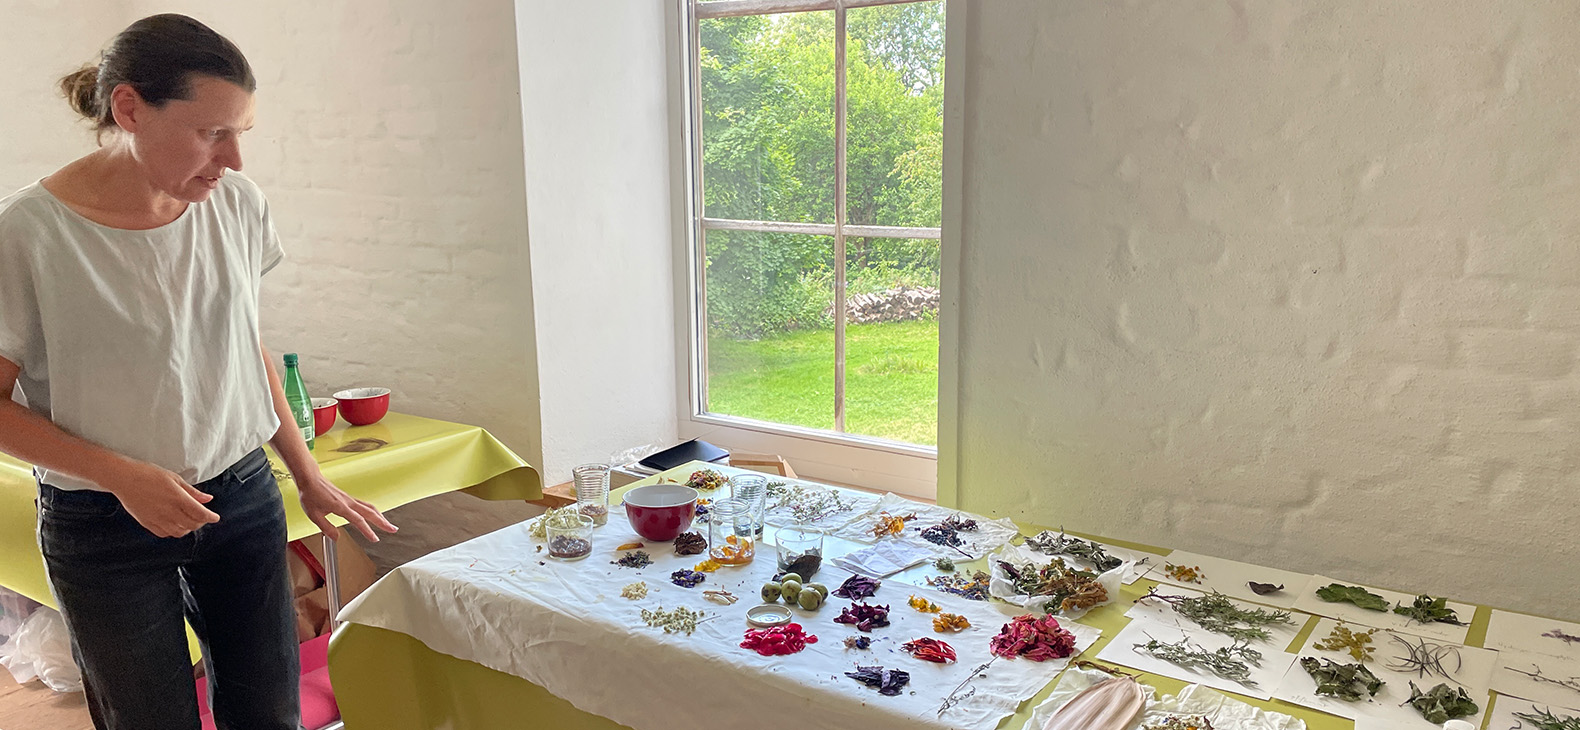 Artist Valerie Leray in her studio at the Schafhof - European Art Forum Upper Bavaria. She looks at her work material arranged on the table, which consists of plants, flowers and small fruits. In the background you can see through a window into the garden of the Schafhof.